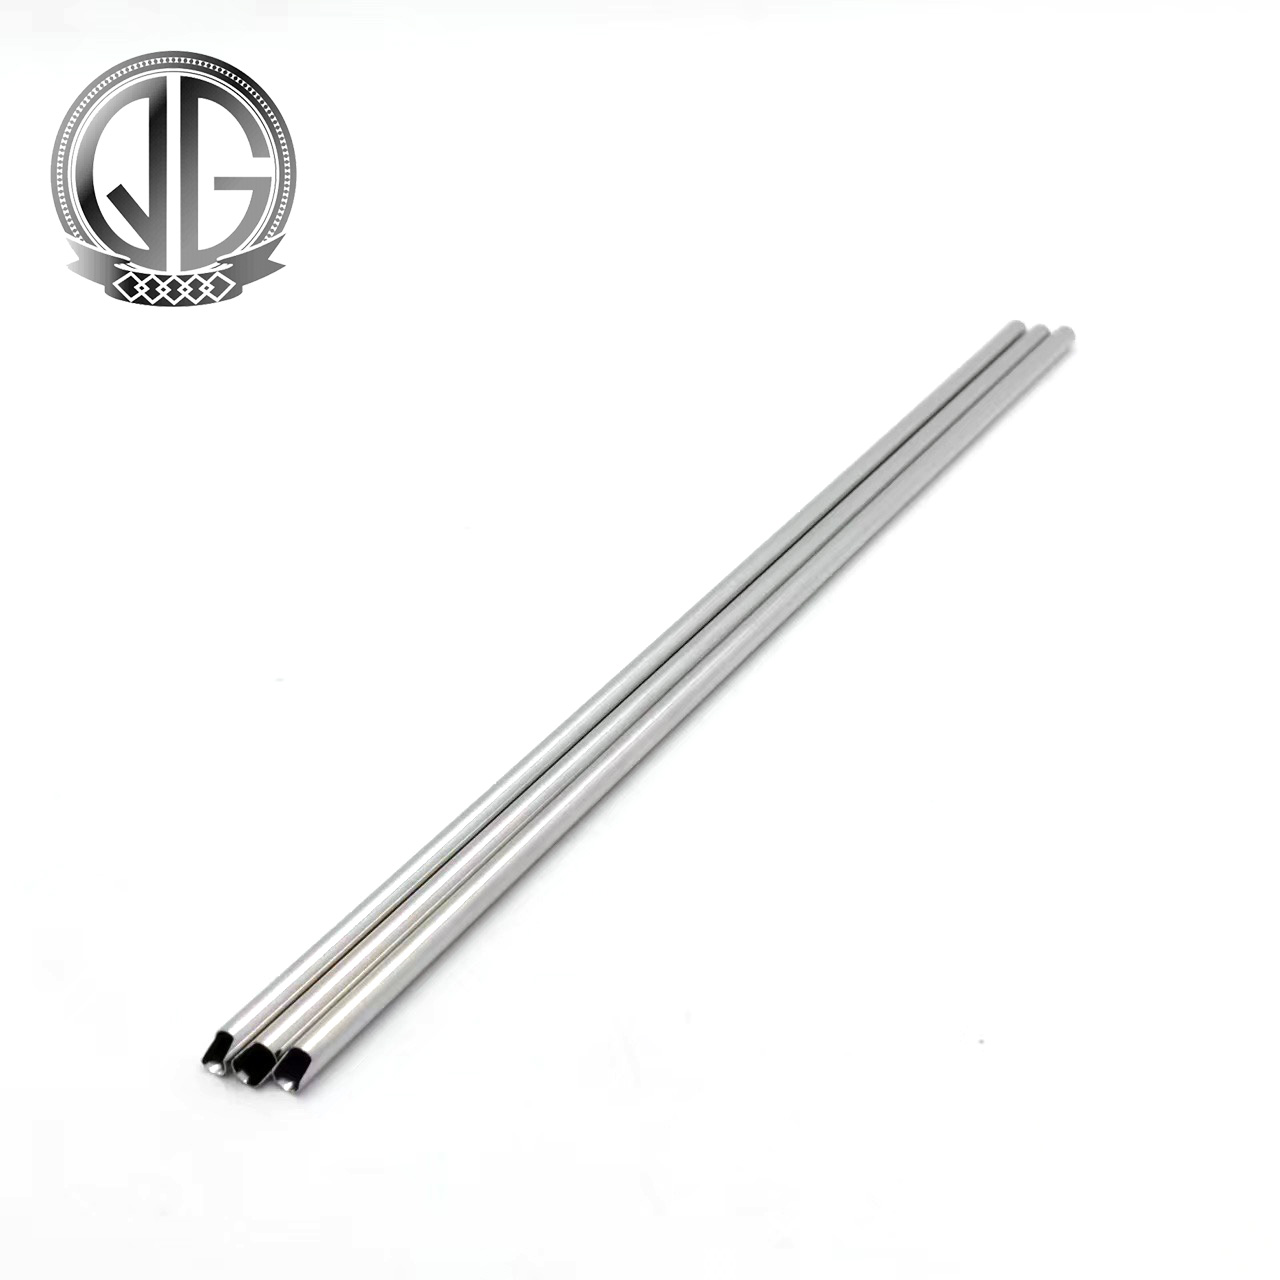 Customized Stainless Steel Medical Surgical siv Capillary Tube